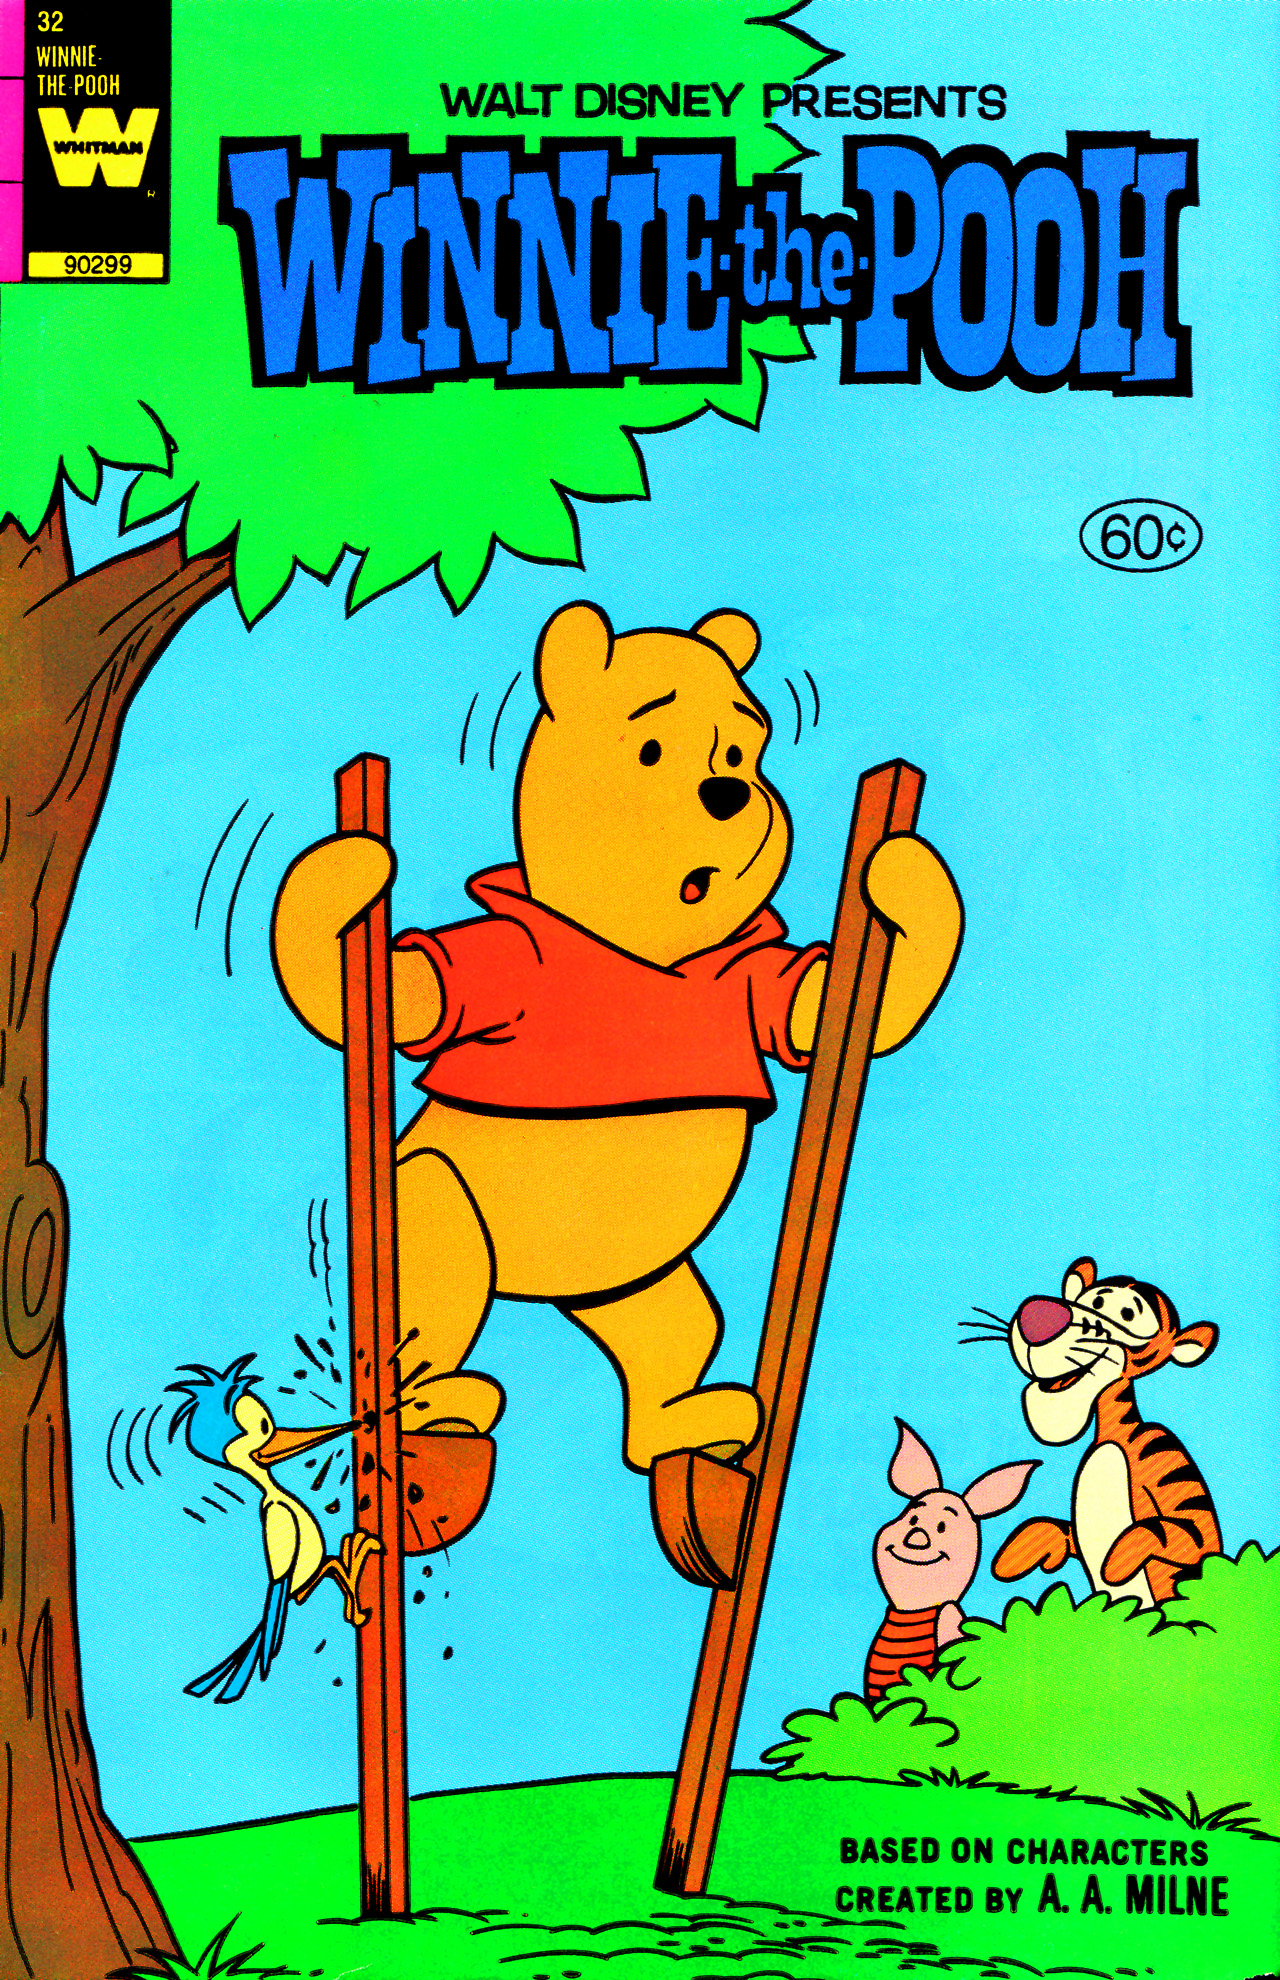 Read online Winnie-the-Pooh comic -  Issue #32 - 1